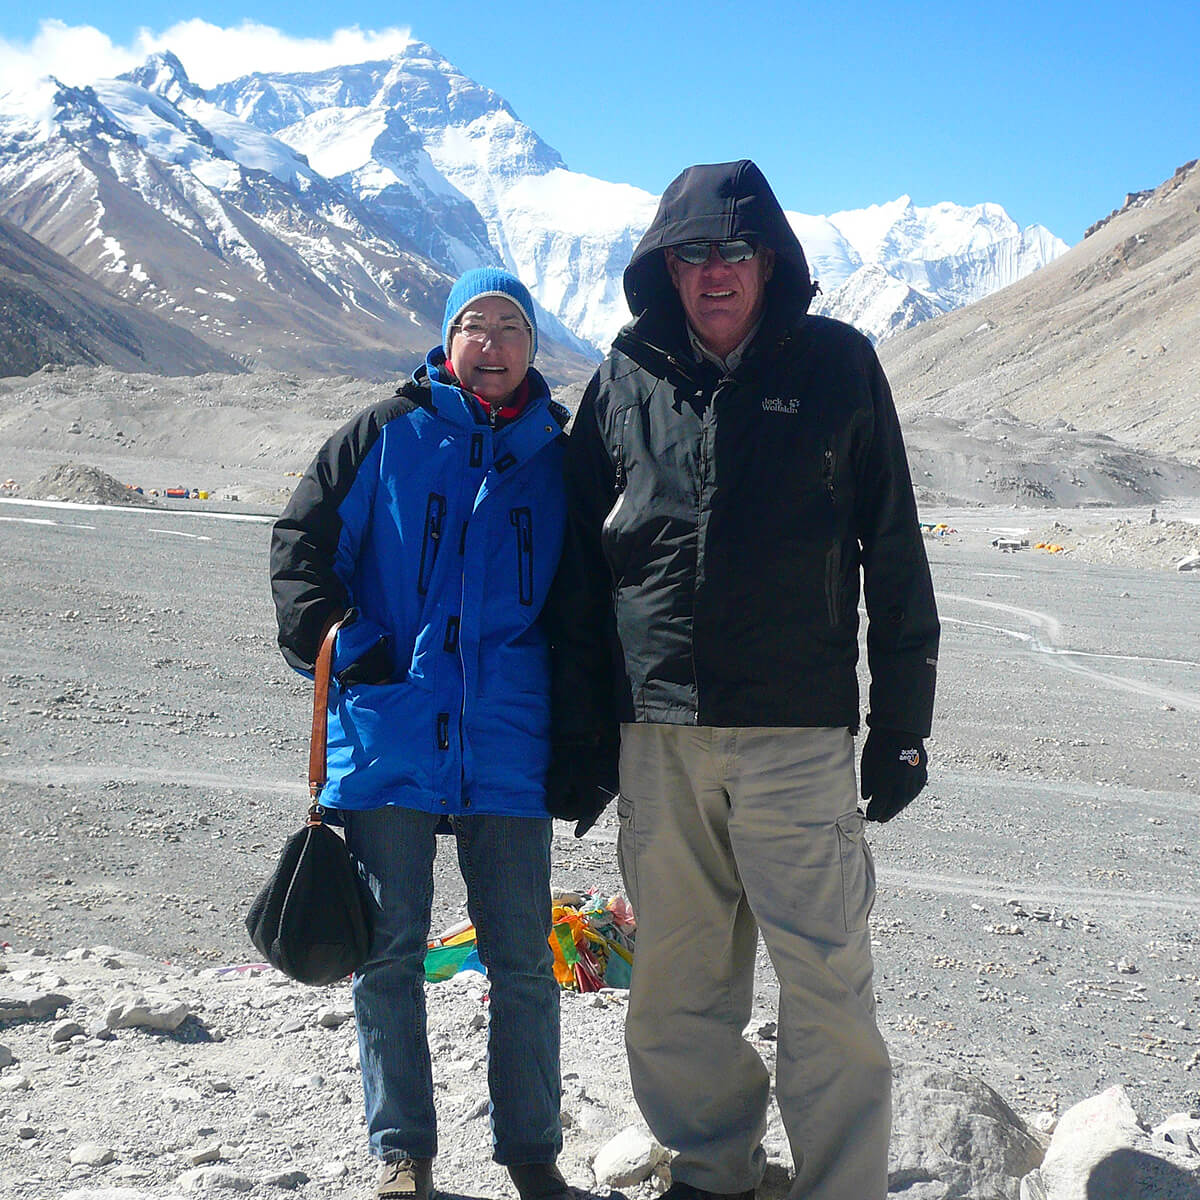 Brenda and John stand together smiling wearing winter gear on a rocky terrain with Mount Everest's snow caps in the background